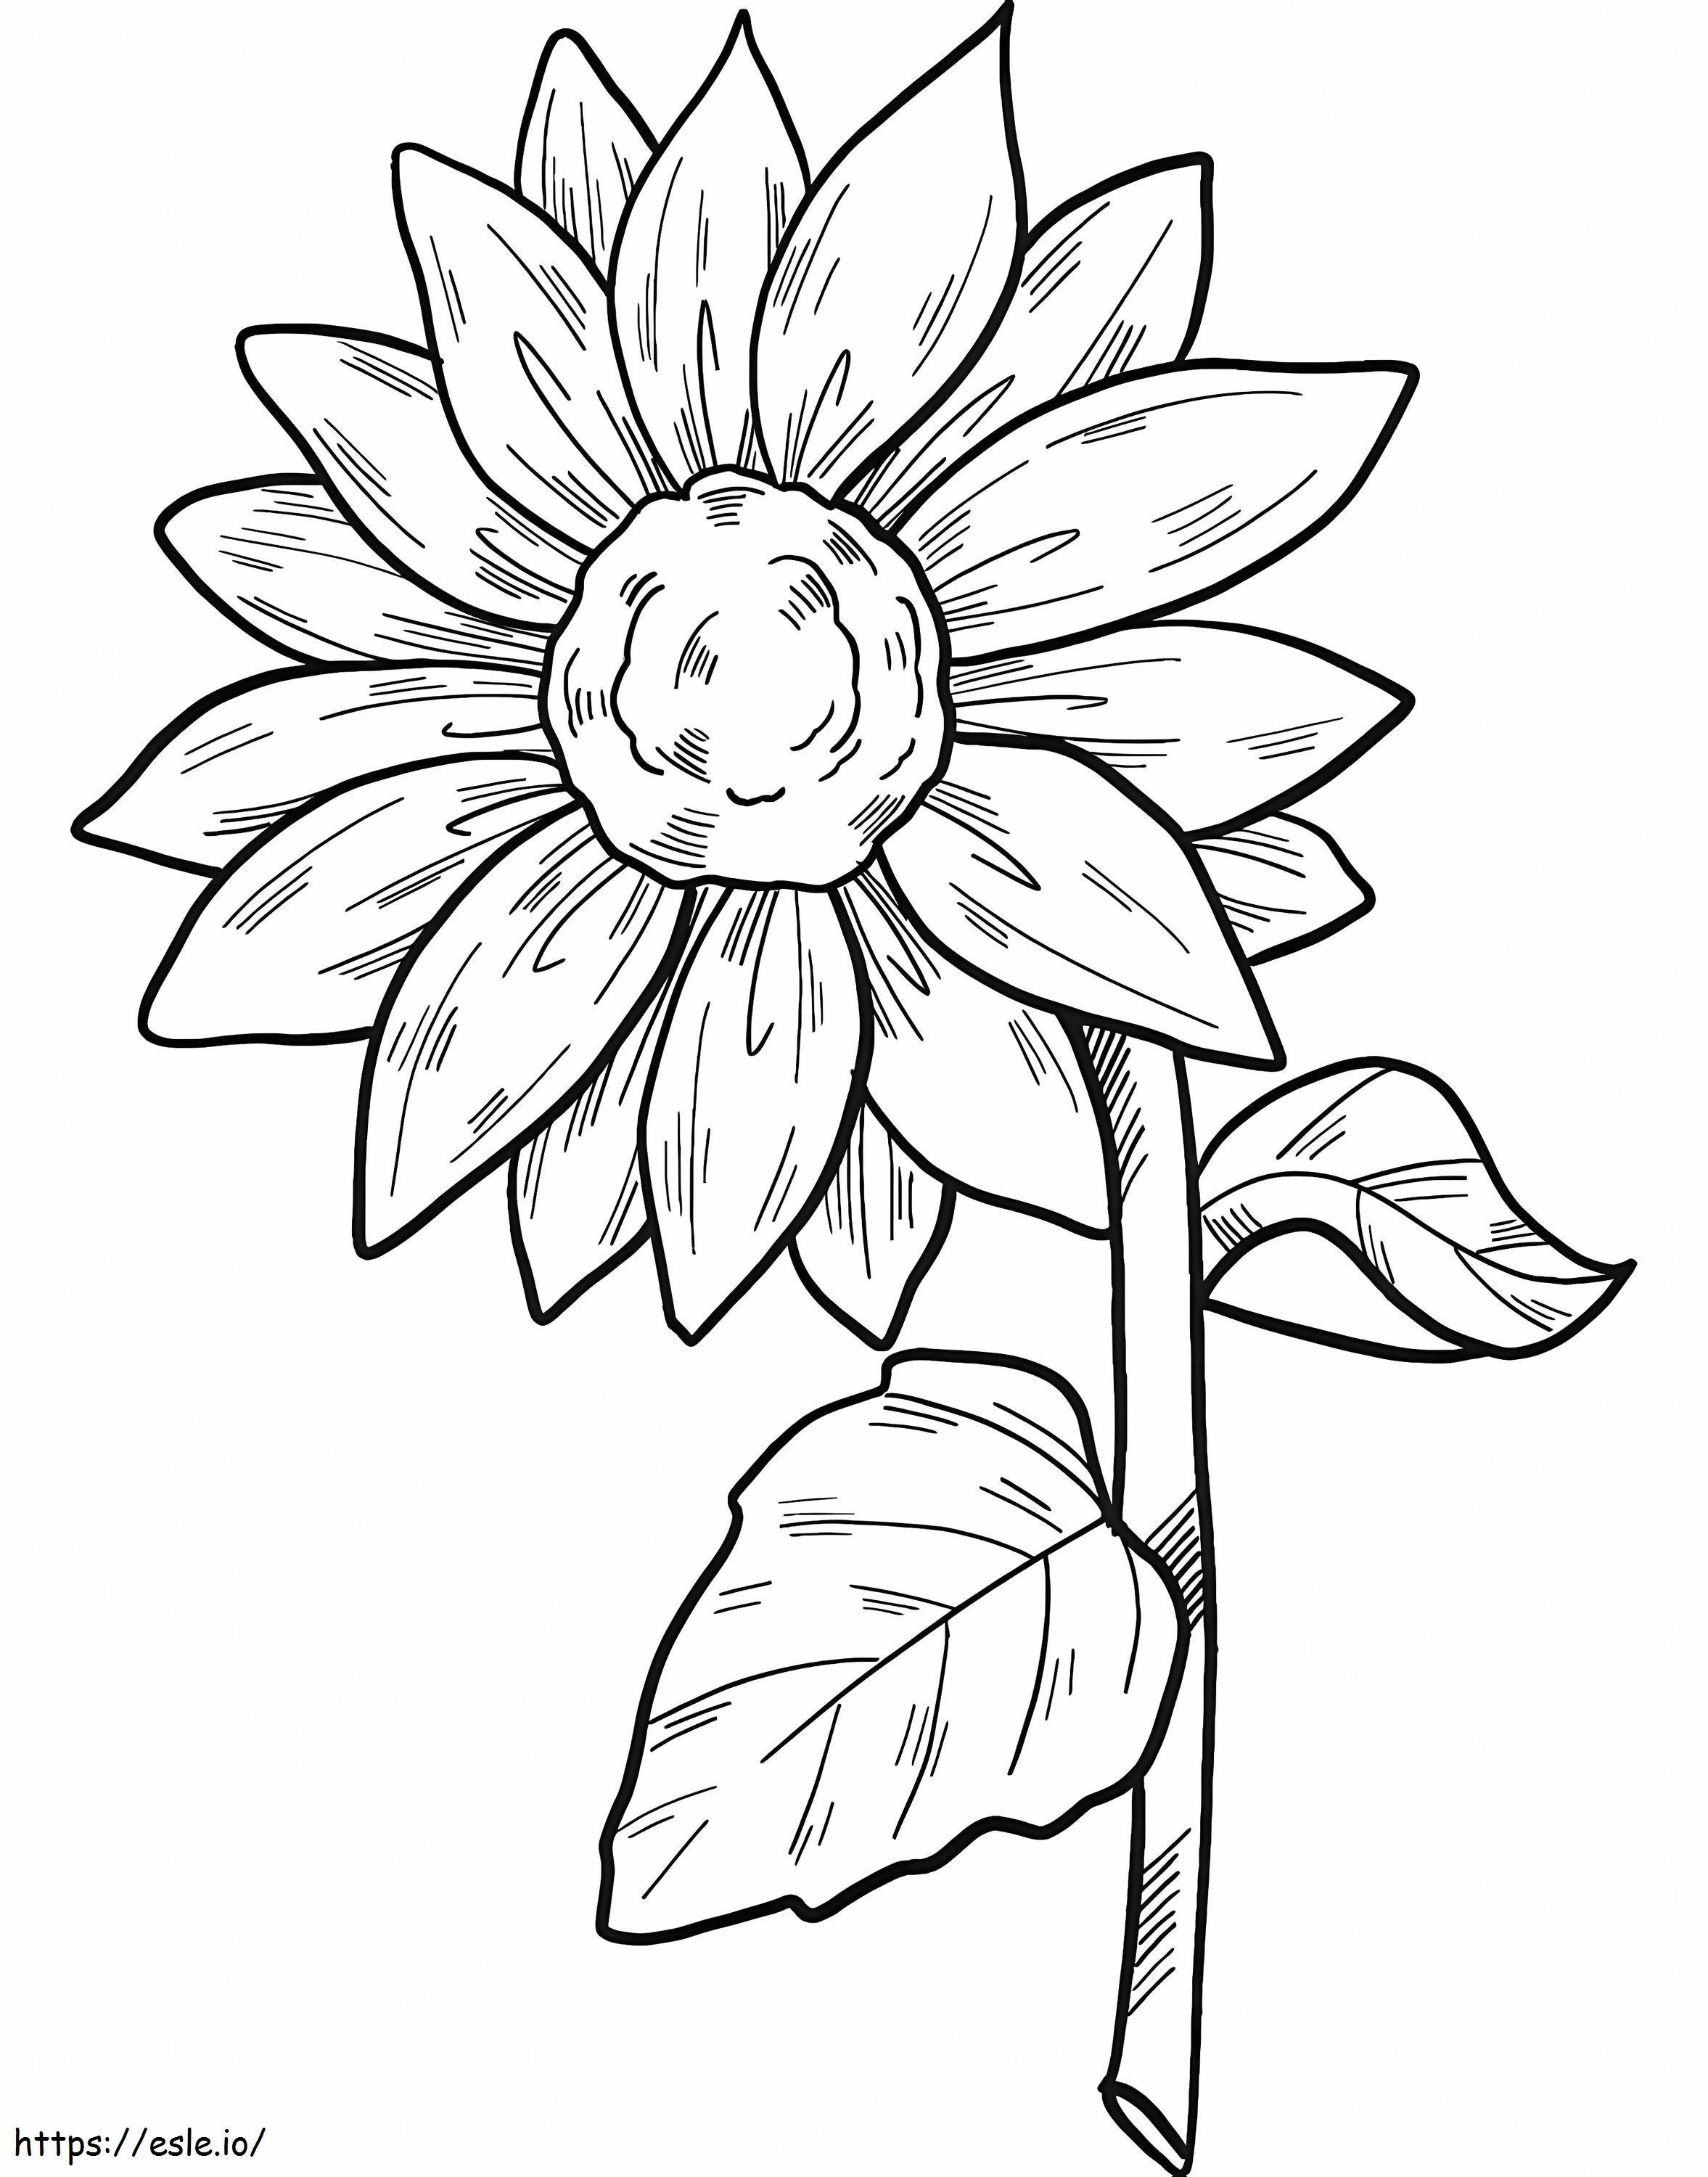 Sunflower To Print coloring page